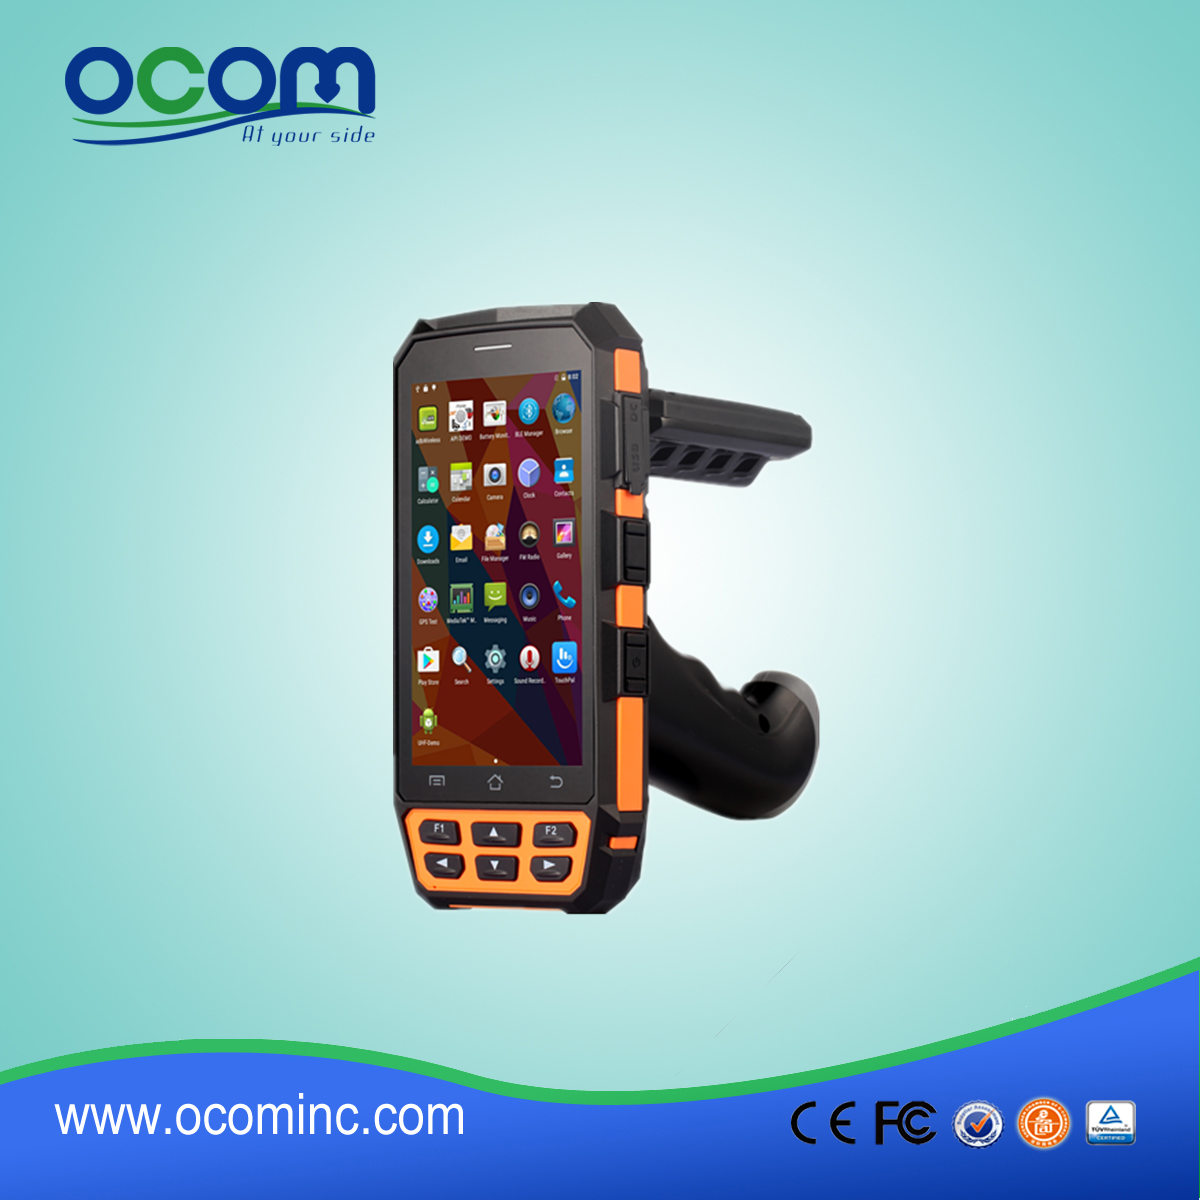 OCBS-D5000 Industrial IP65 Handheld PDA with Android OS